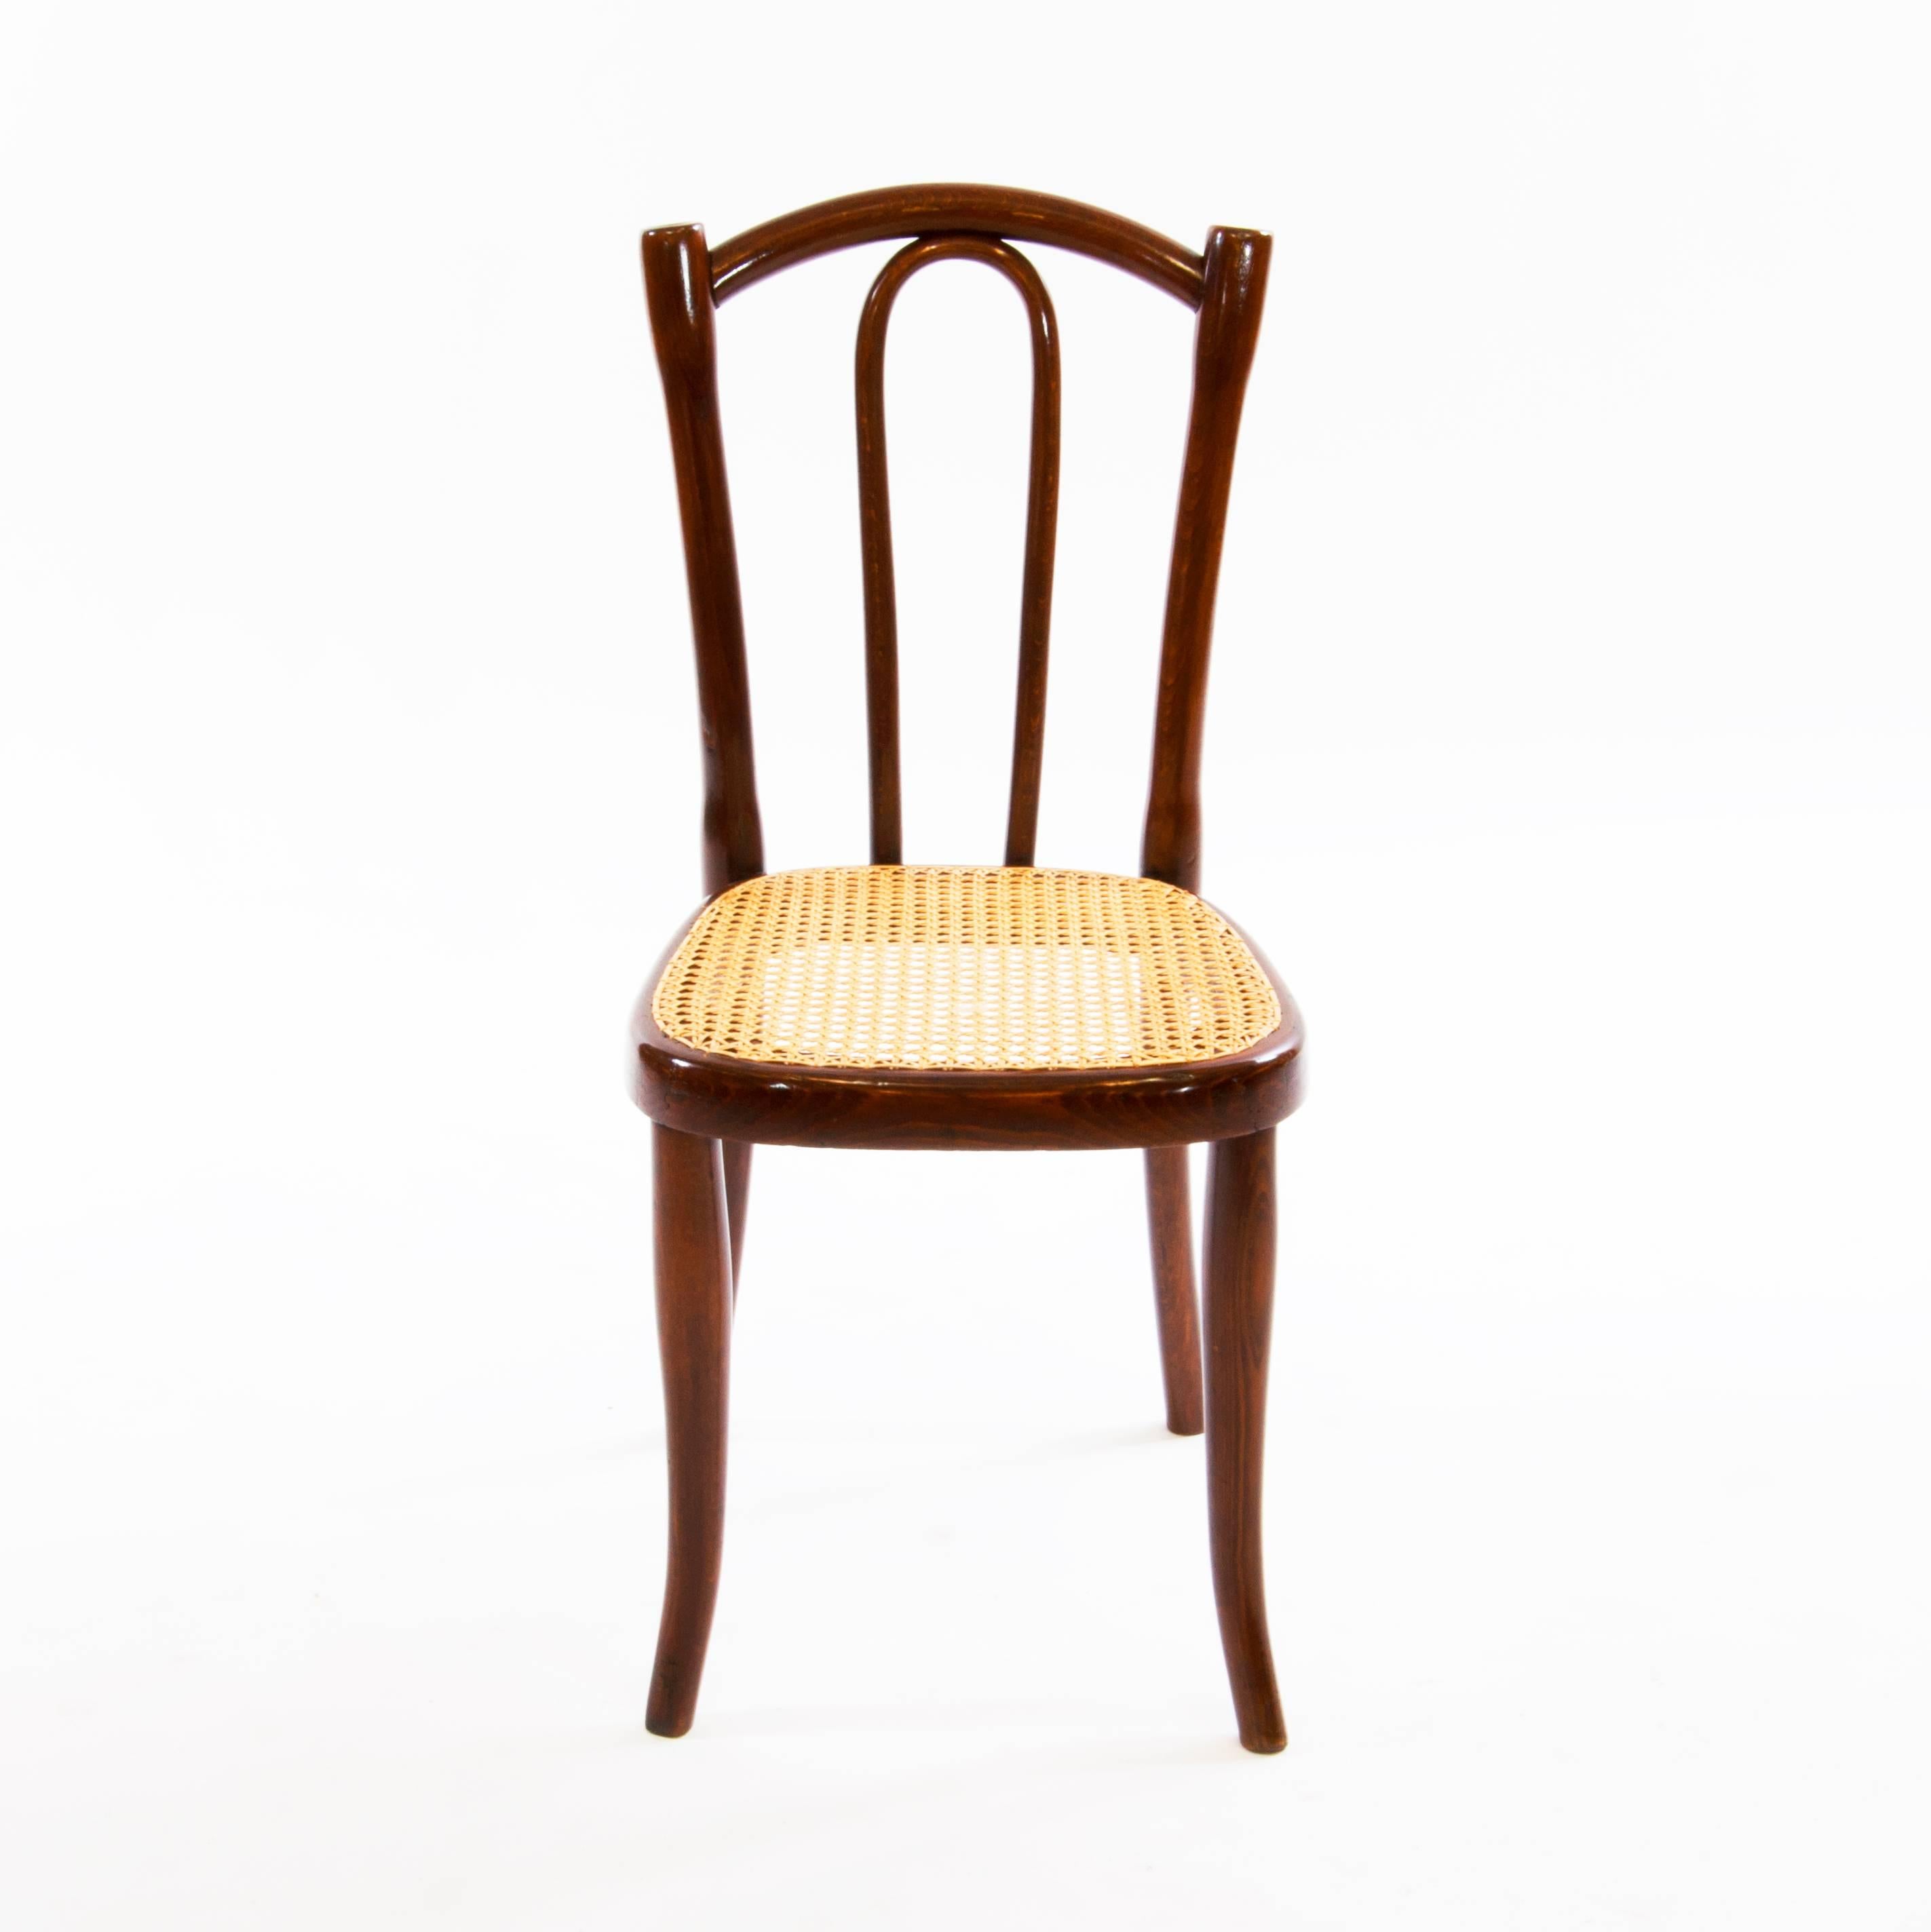 Very rare and antique Thonet children bentwood chairs no. 2, which were produced between 1910-1929 and was designed in 1880 by the Gebruder Thonet.
The company Thonet was founded by Michael Thonet and was greatly expanded by their sons. They